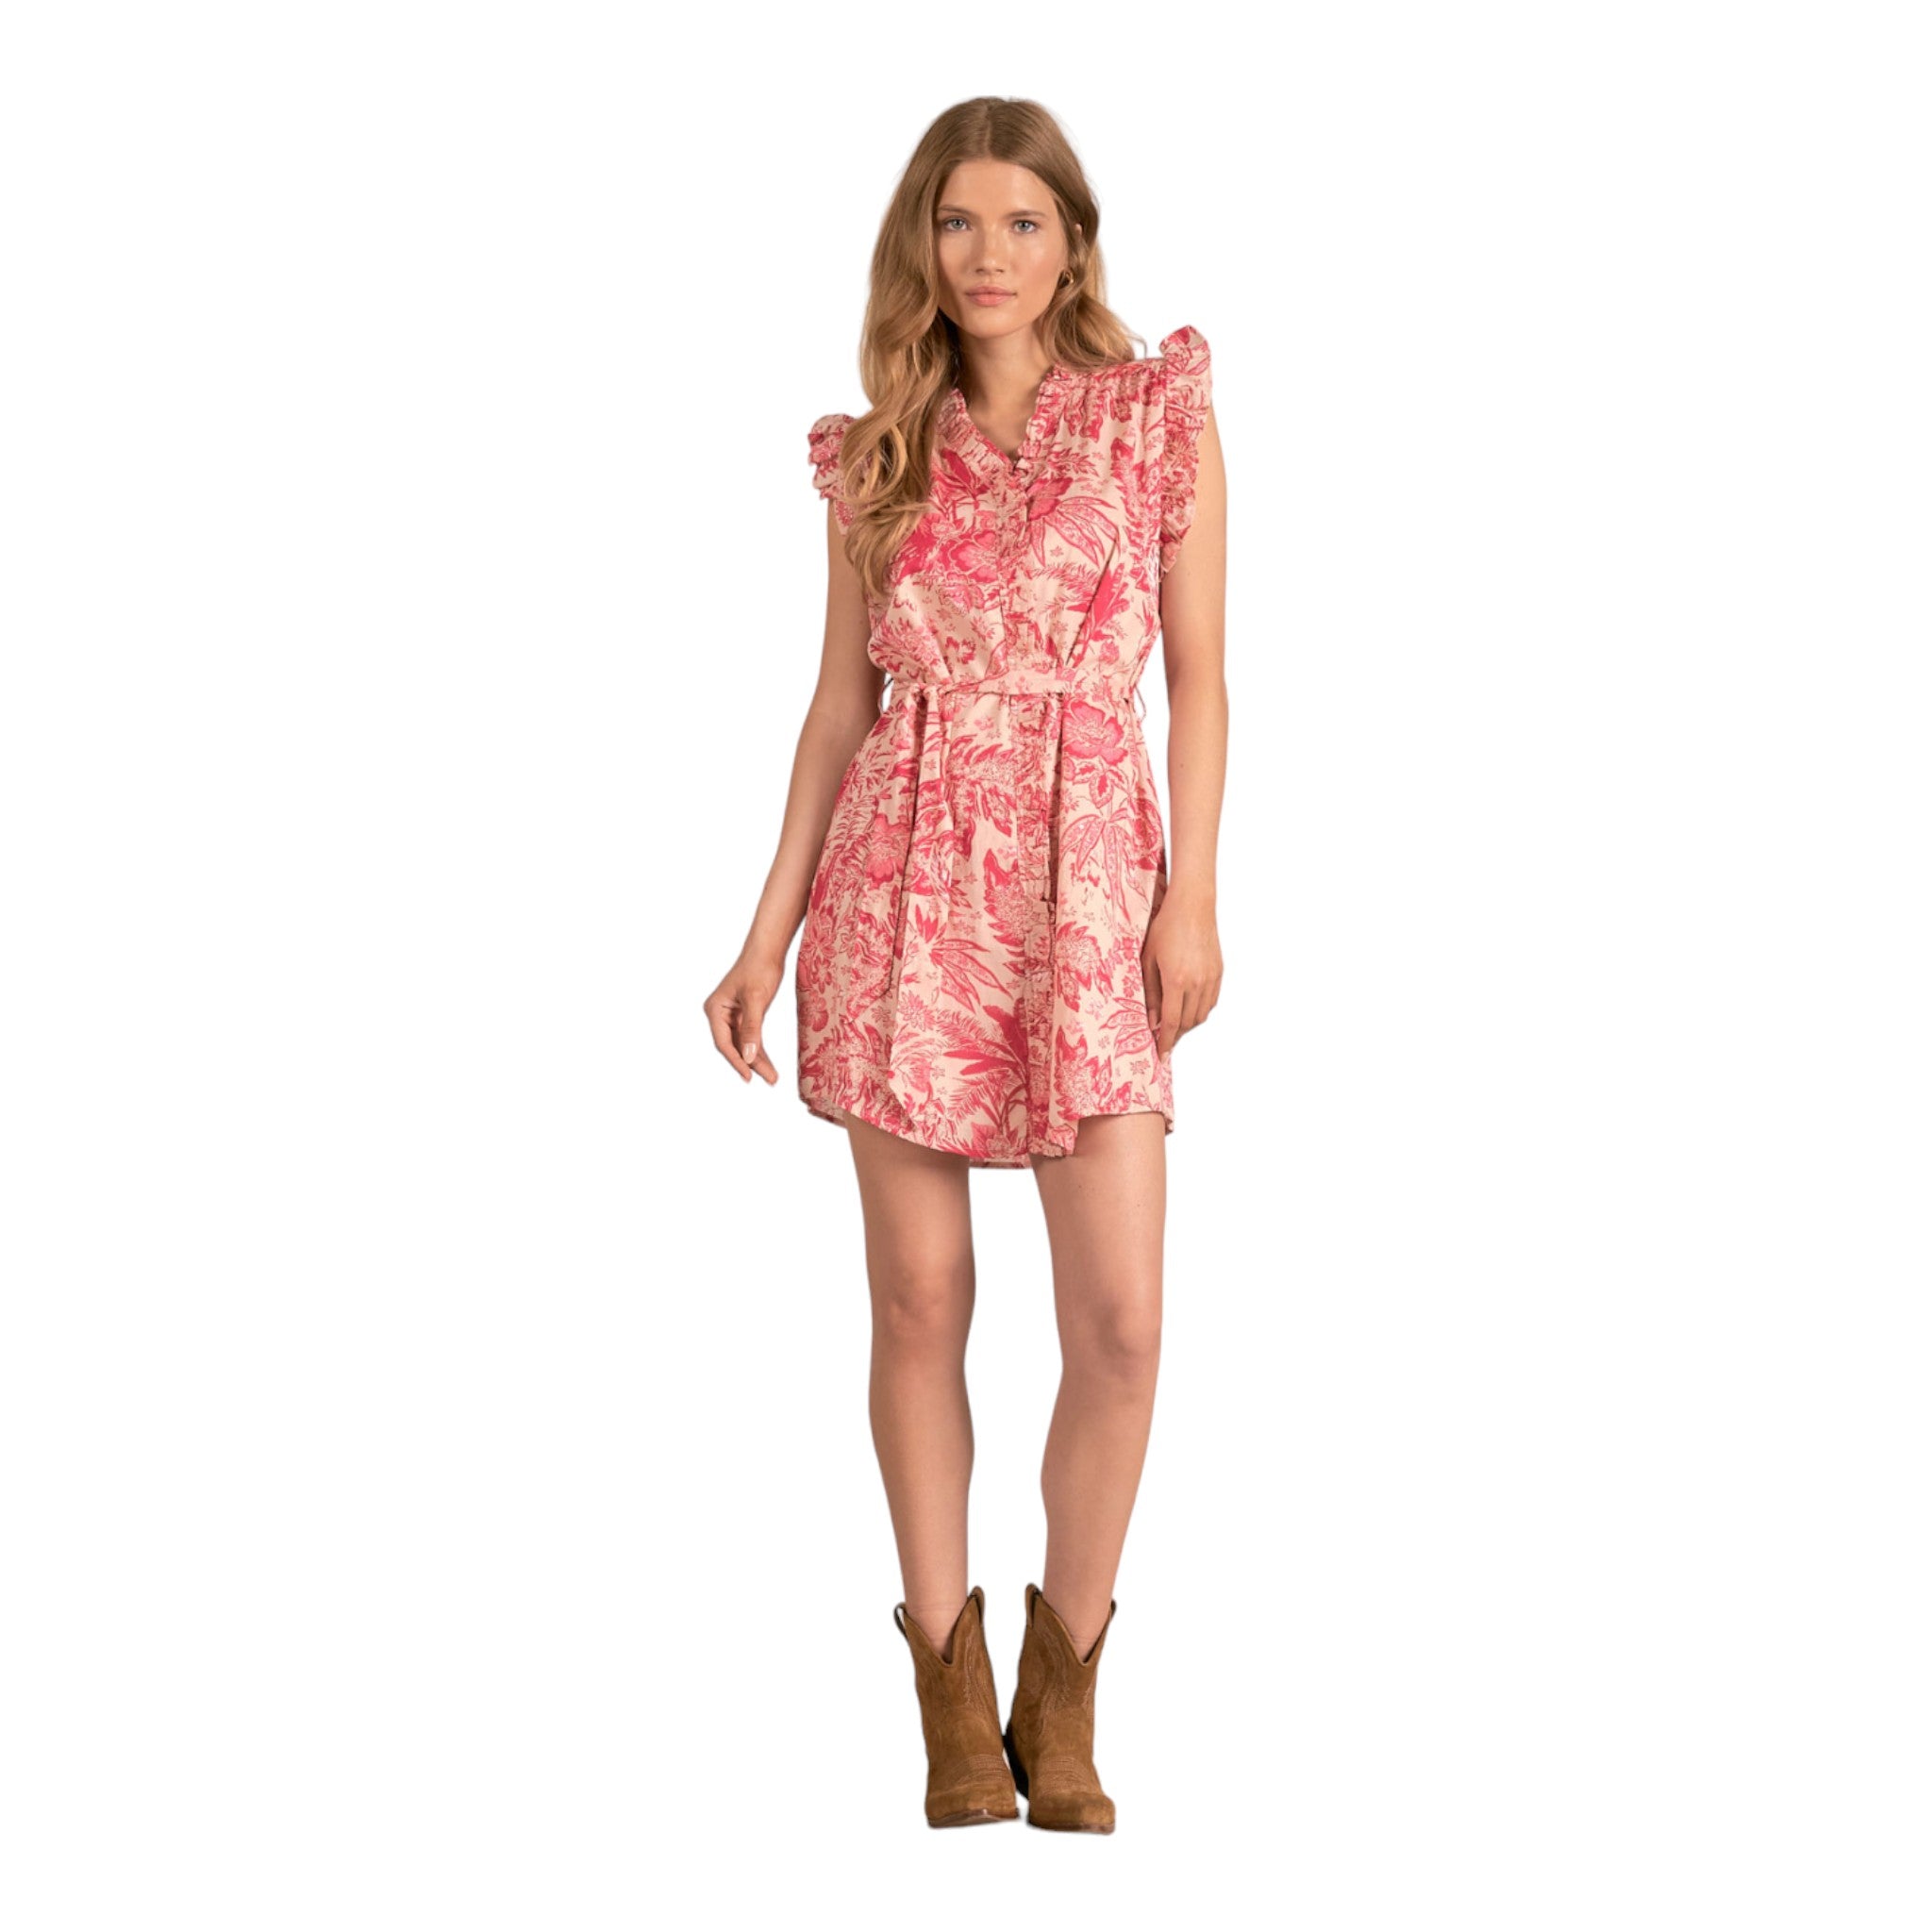 Elan - Ruffle Sleeve Dress with Belt - Pink Leafy Floral